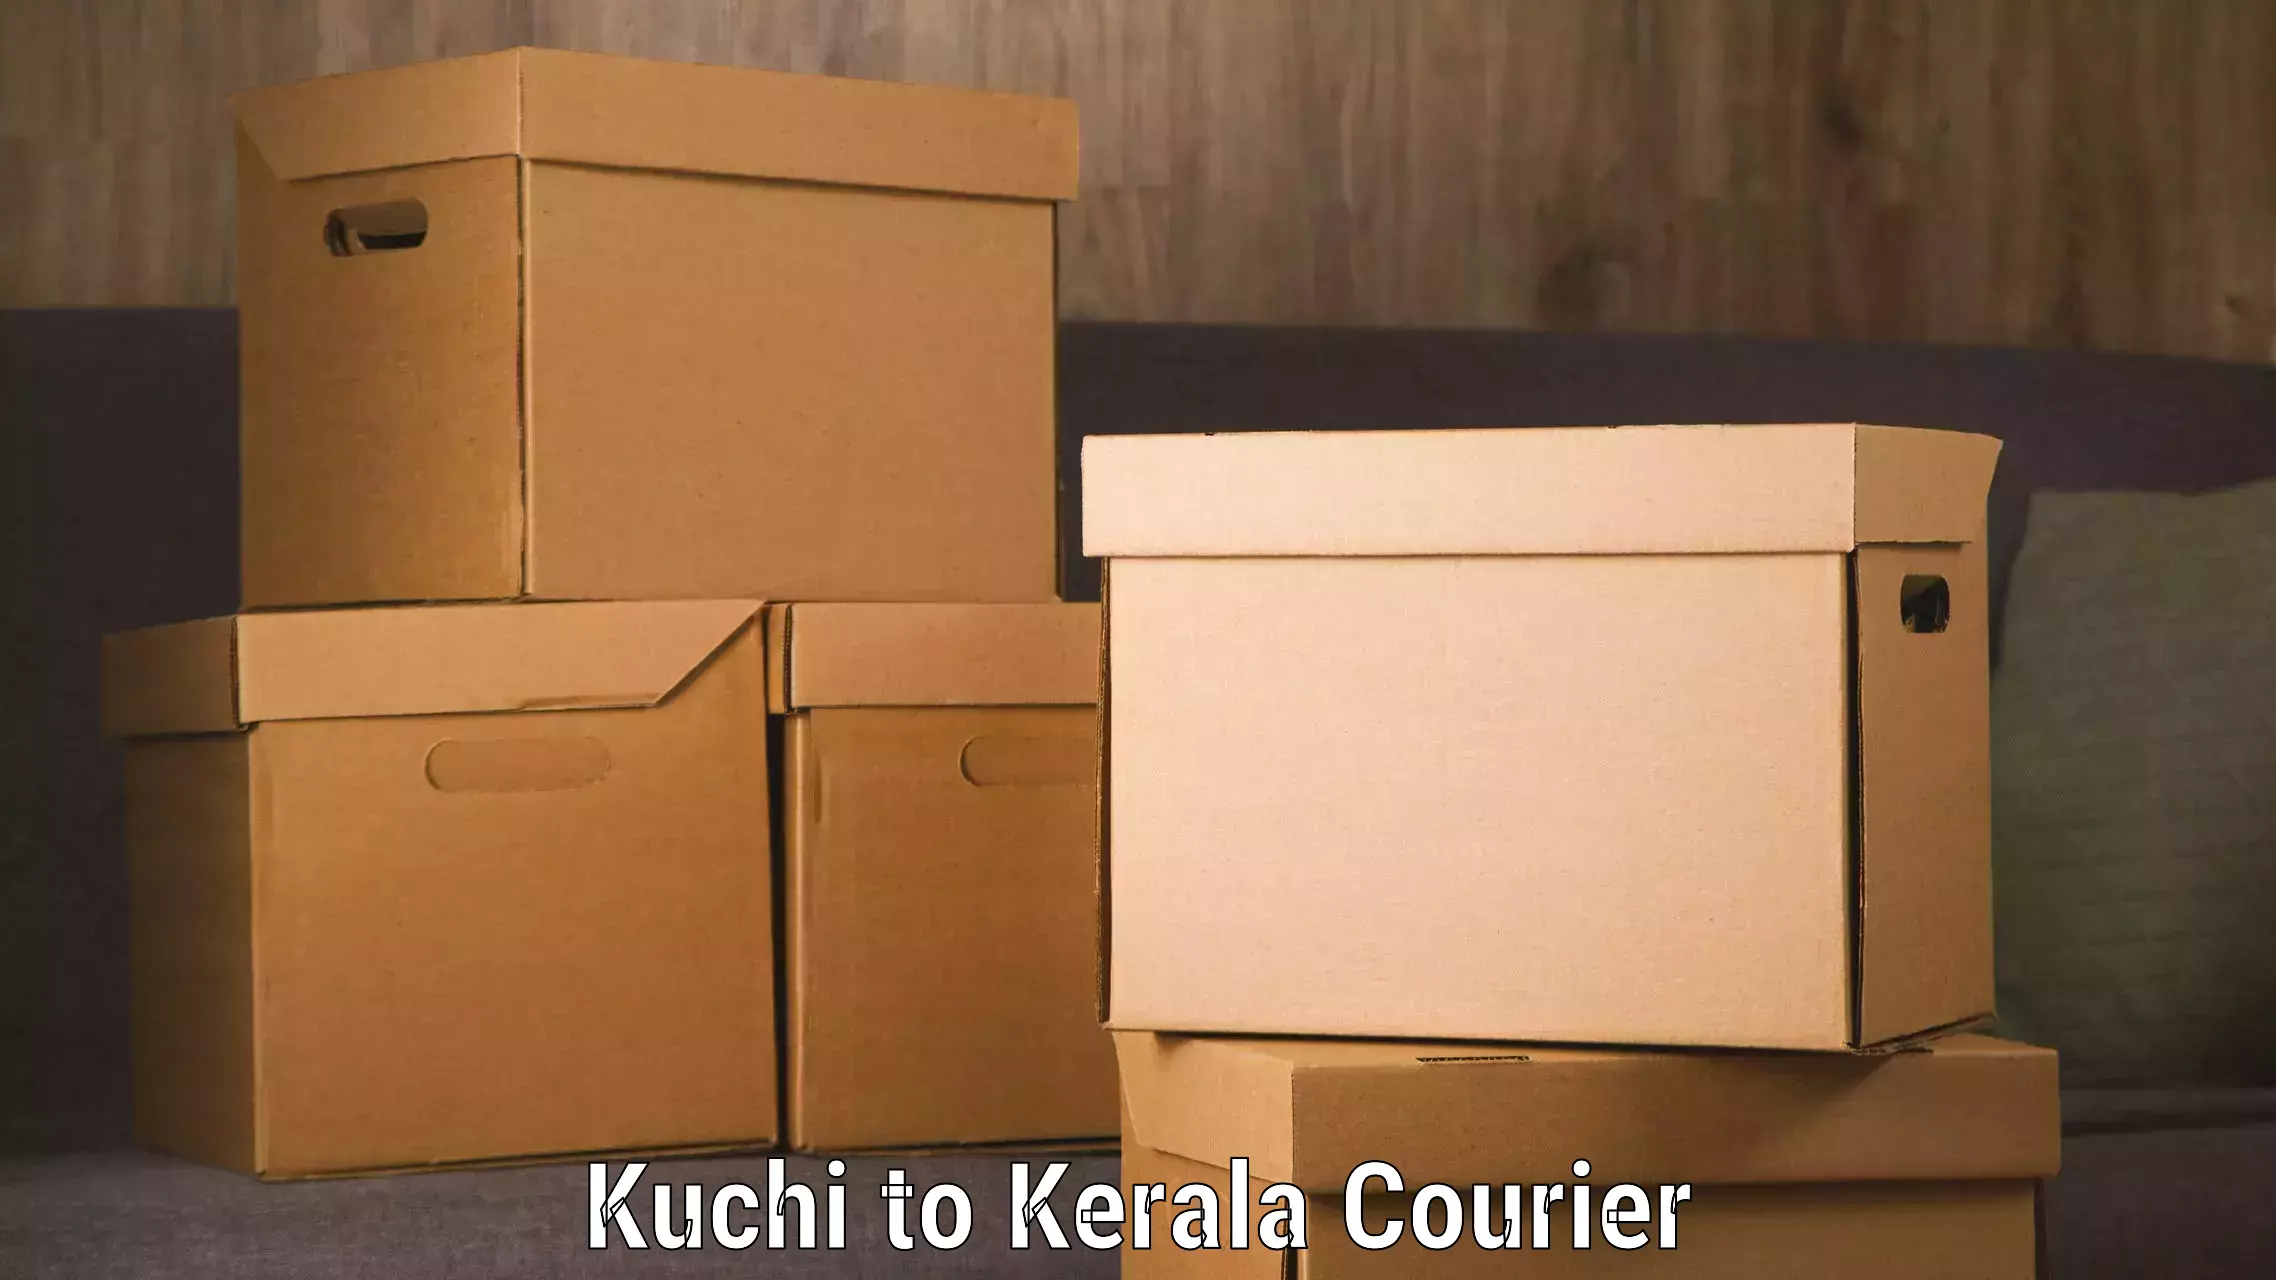 State-of-the-art courier technology Kuchi to Poojapura